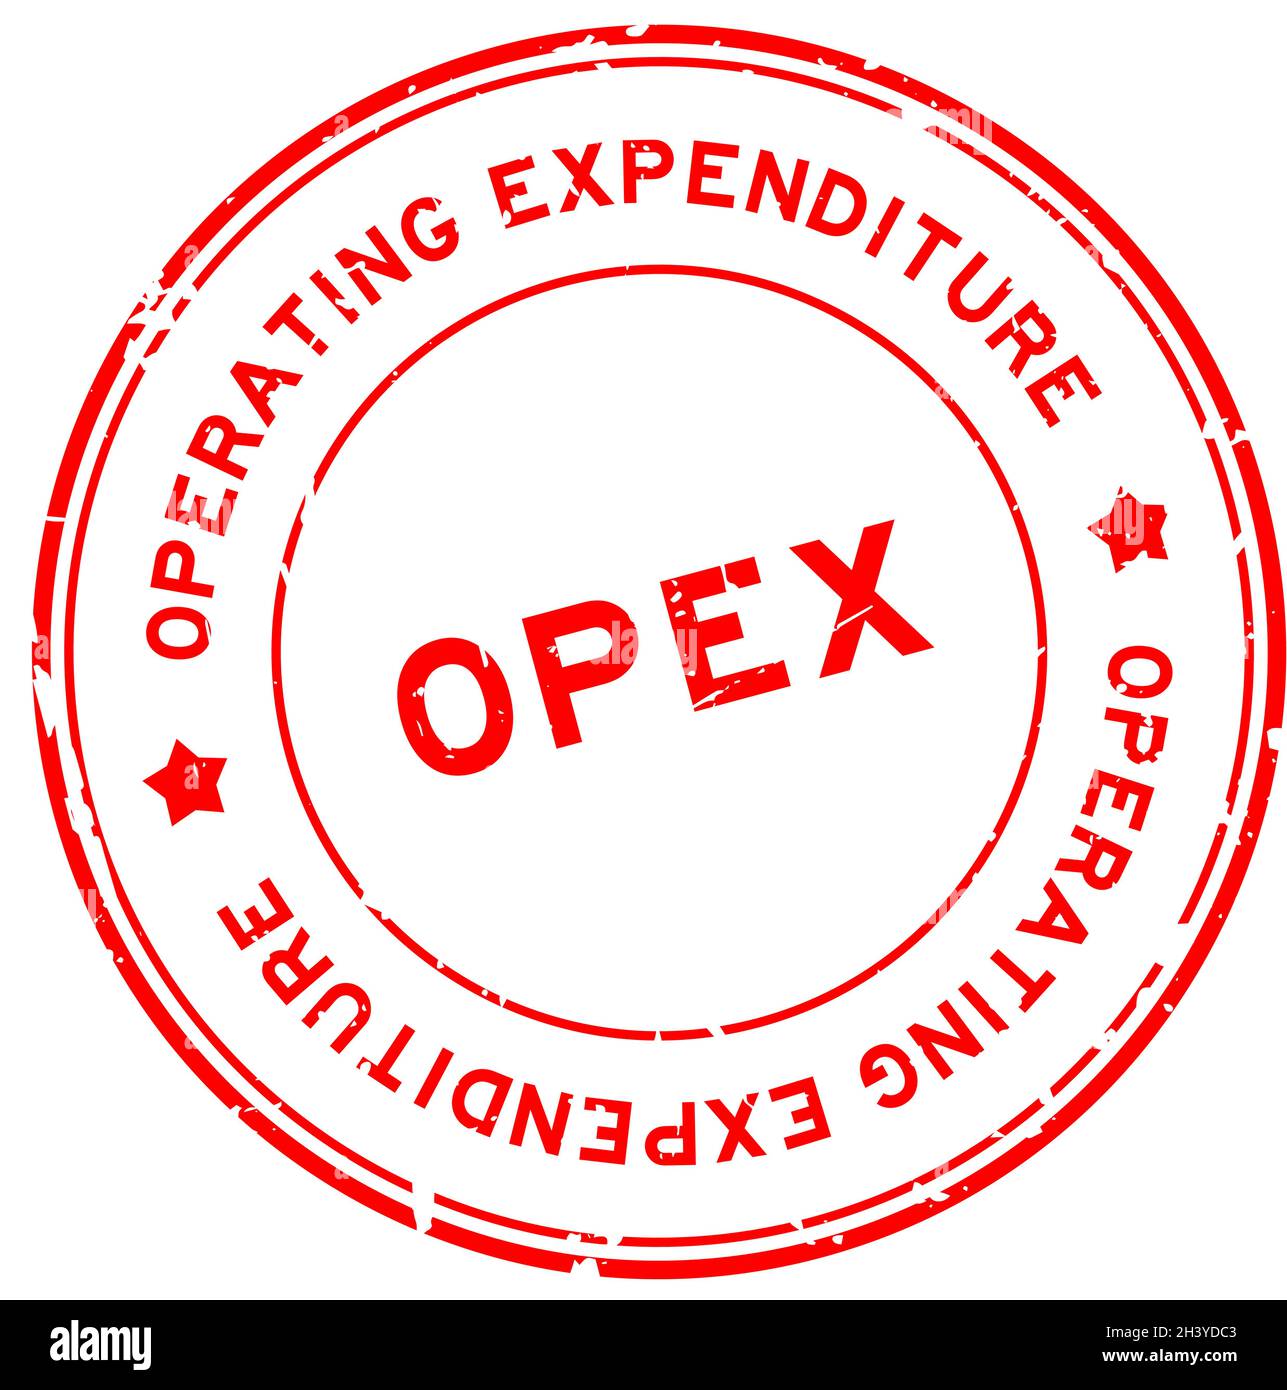 Grunge red OPEX operating expendiure word round rubber seal stamp on white background Stock Vector